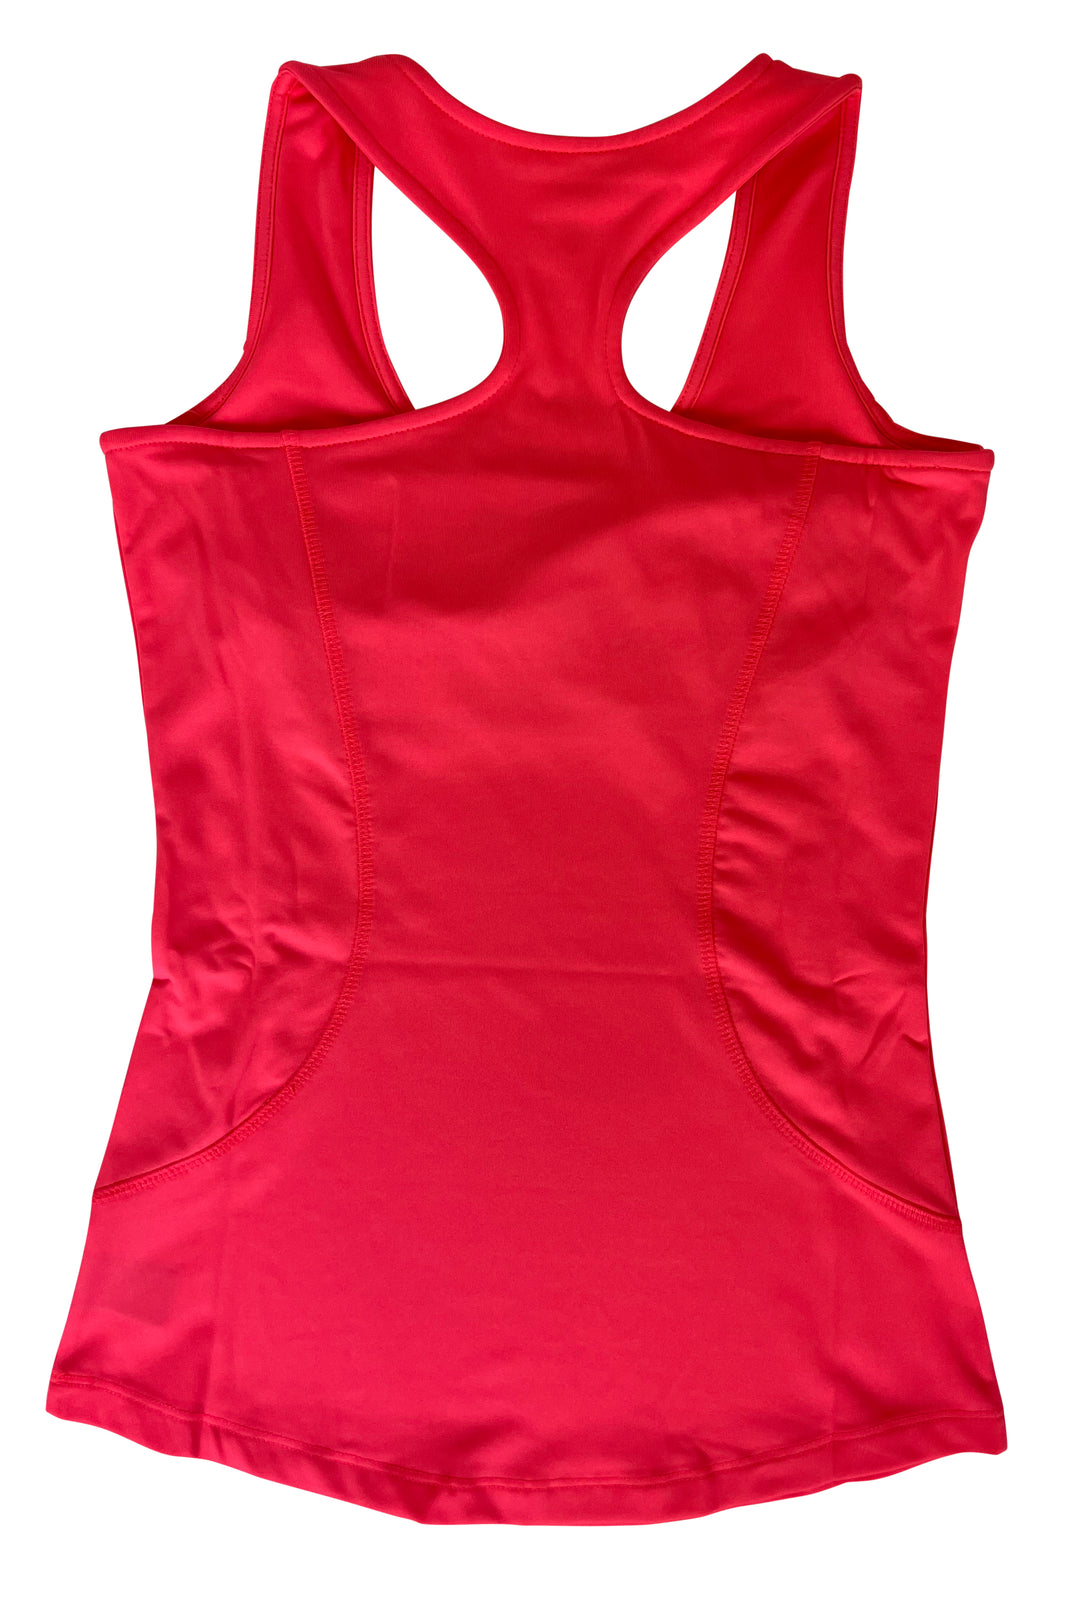 JoFit Womens T12035 - CORAL GLOW - Golf Anything Canada